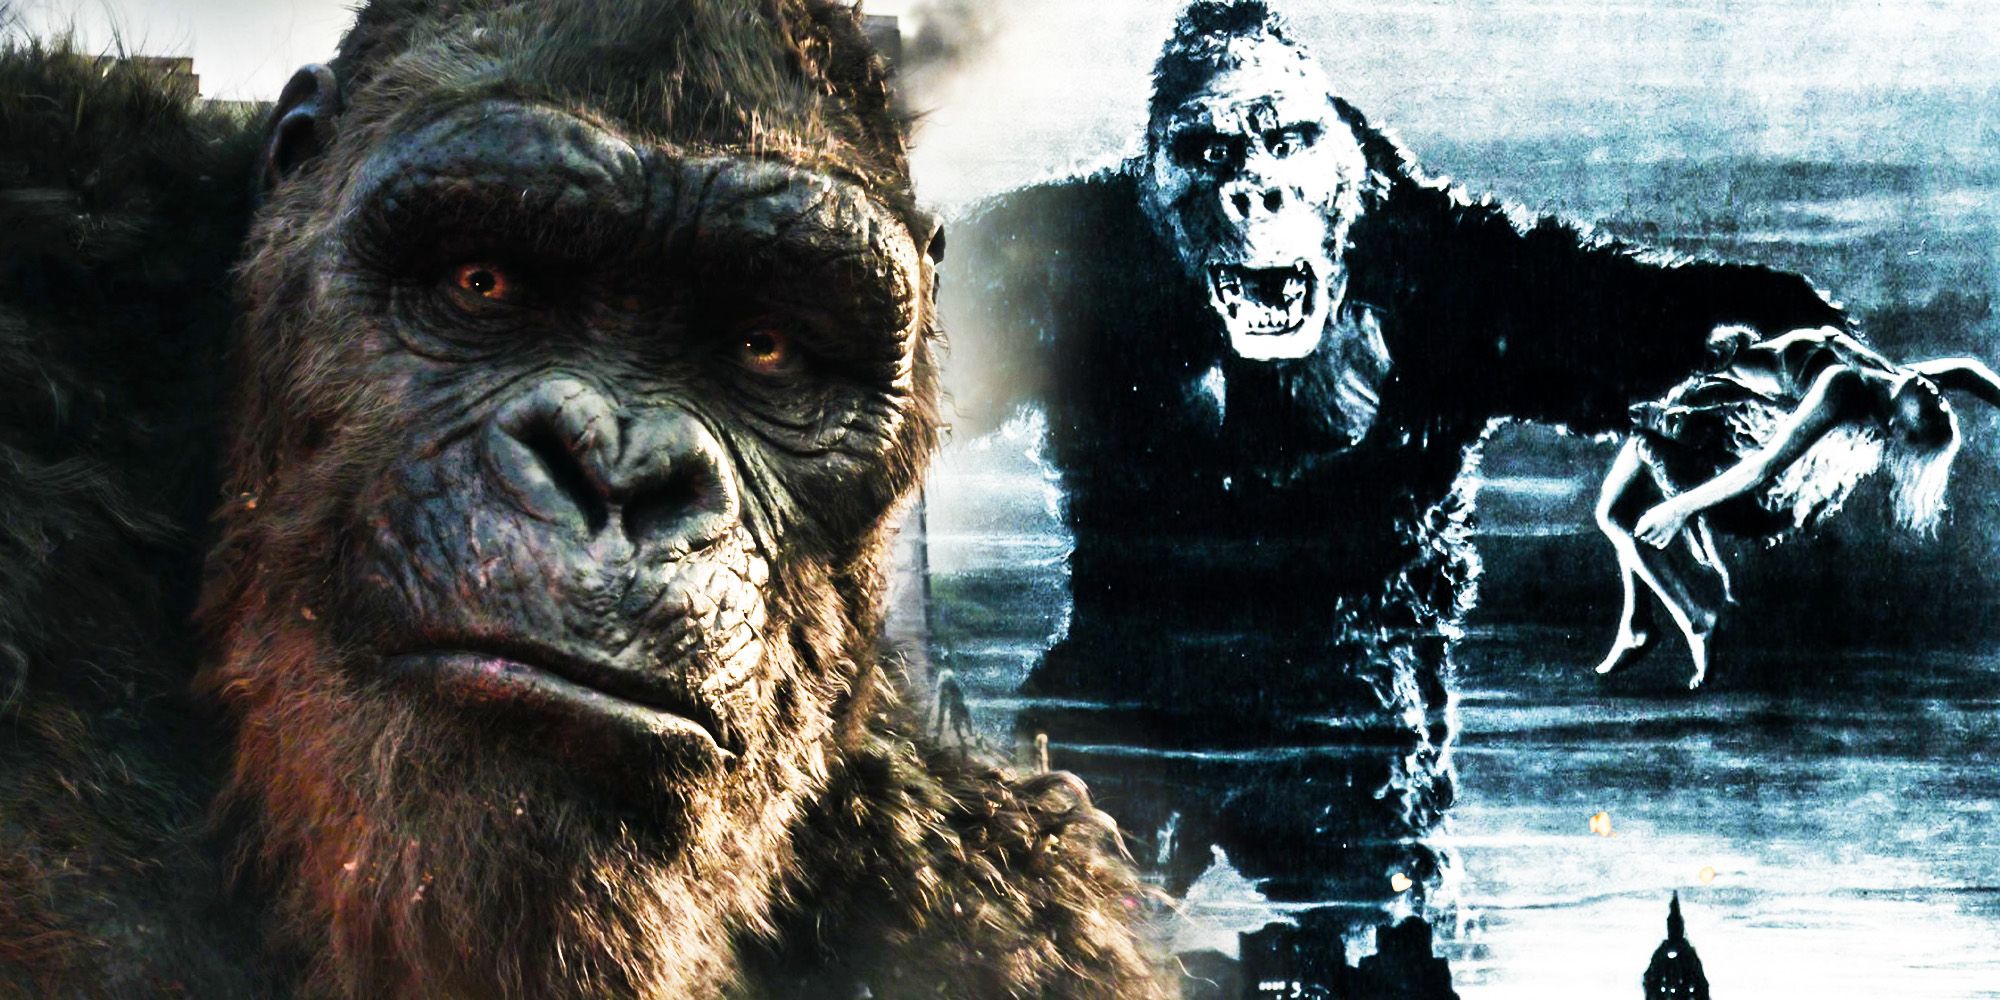 Every King Kong Movie (In Chronological Order)